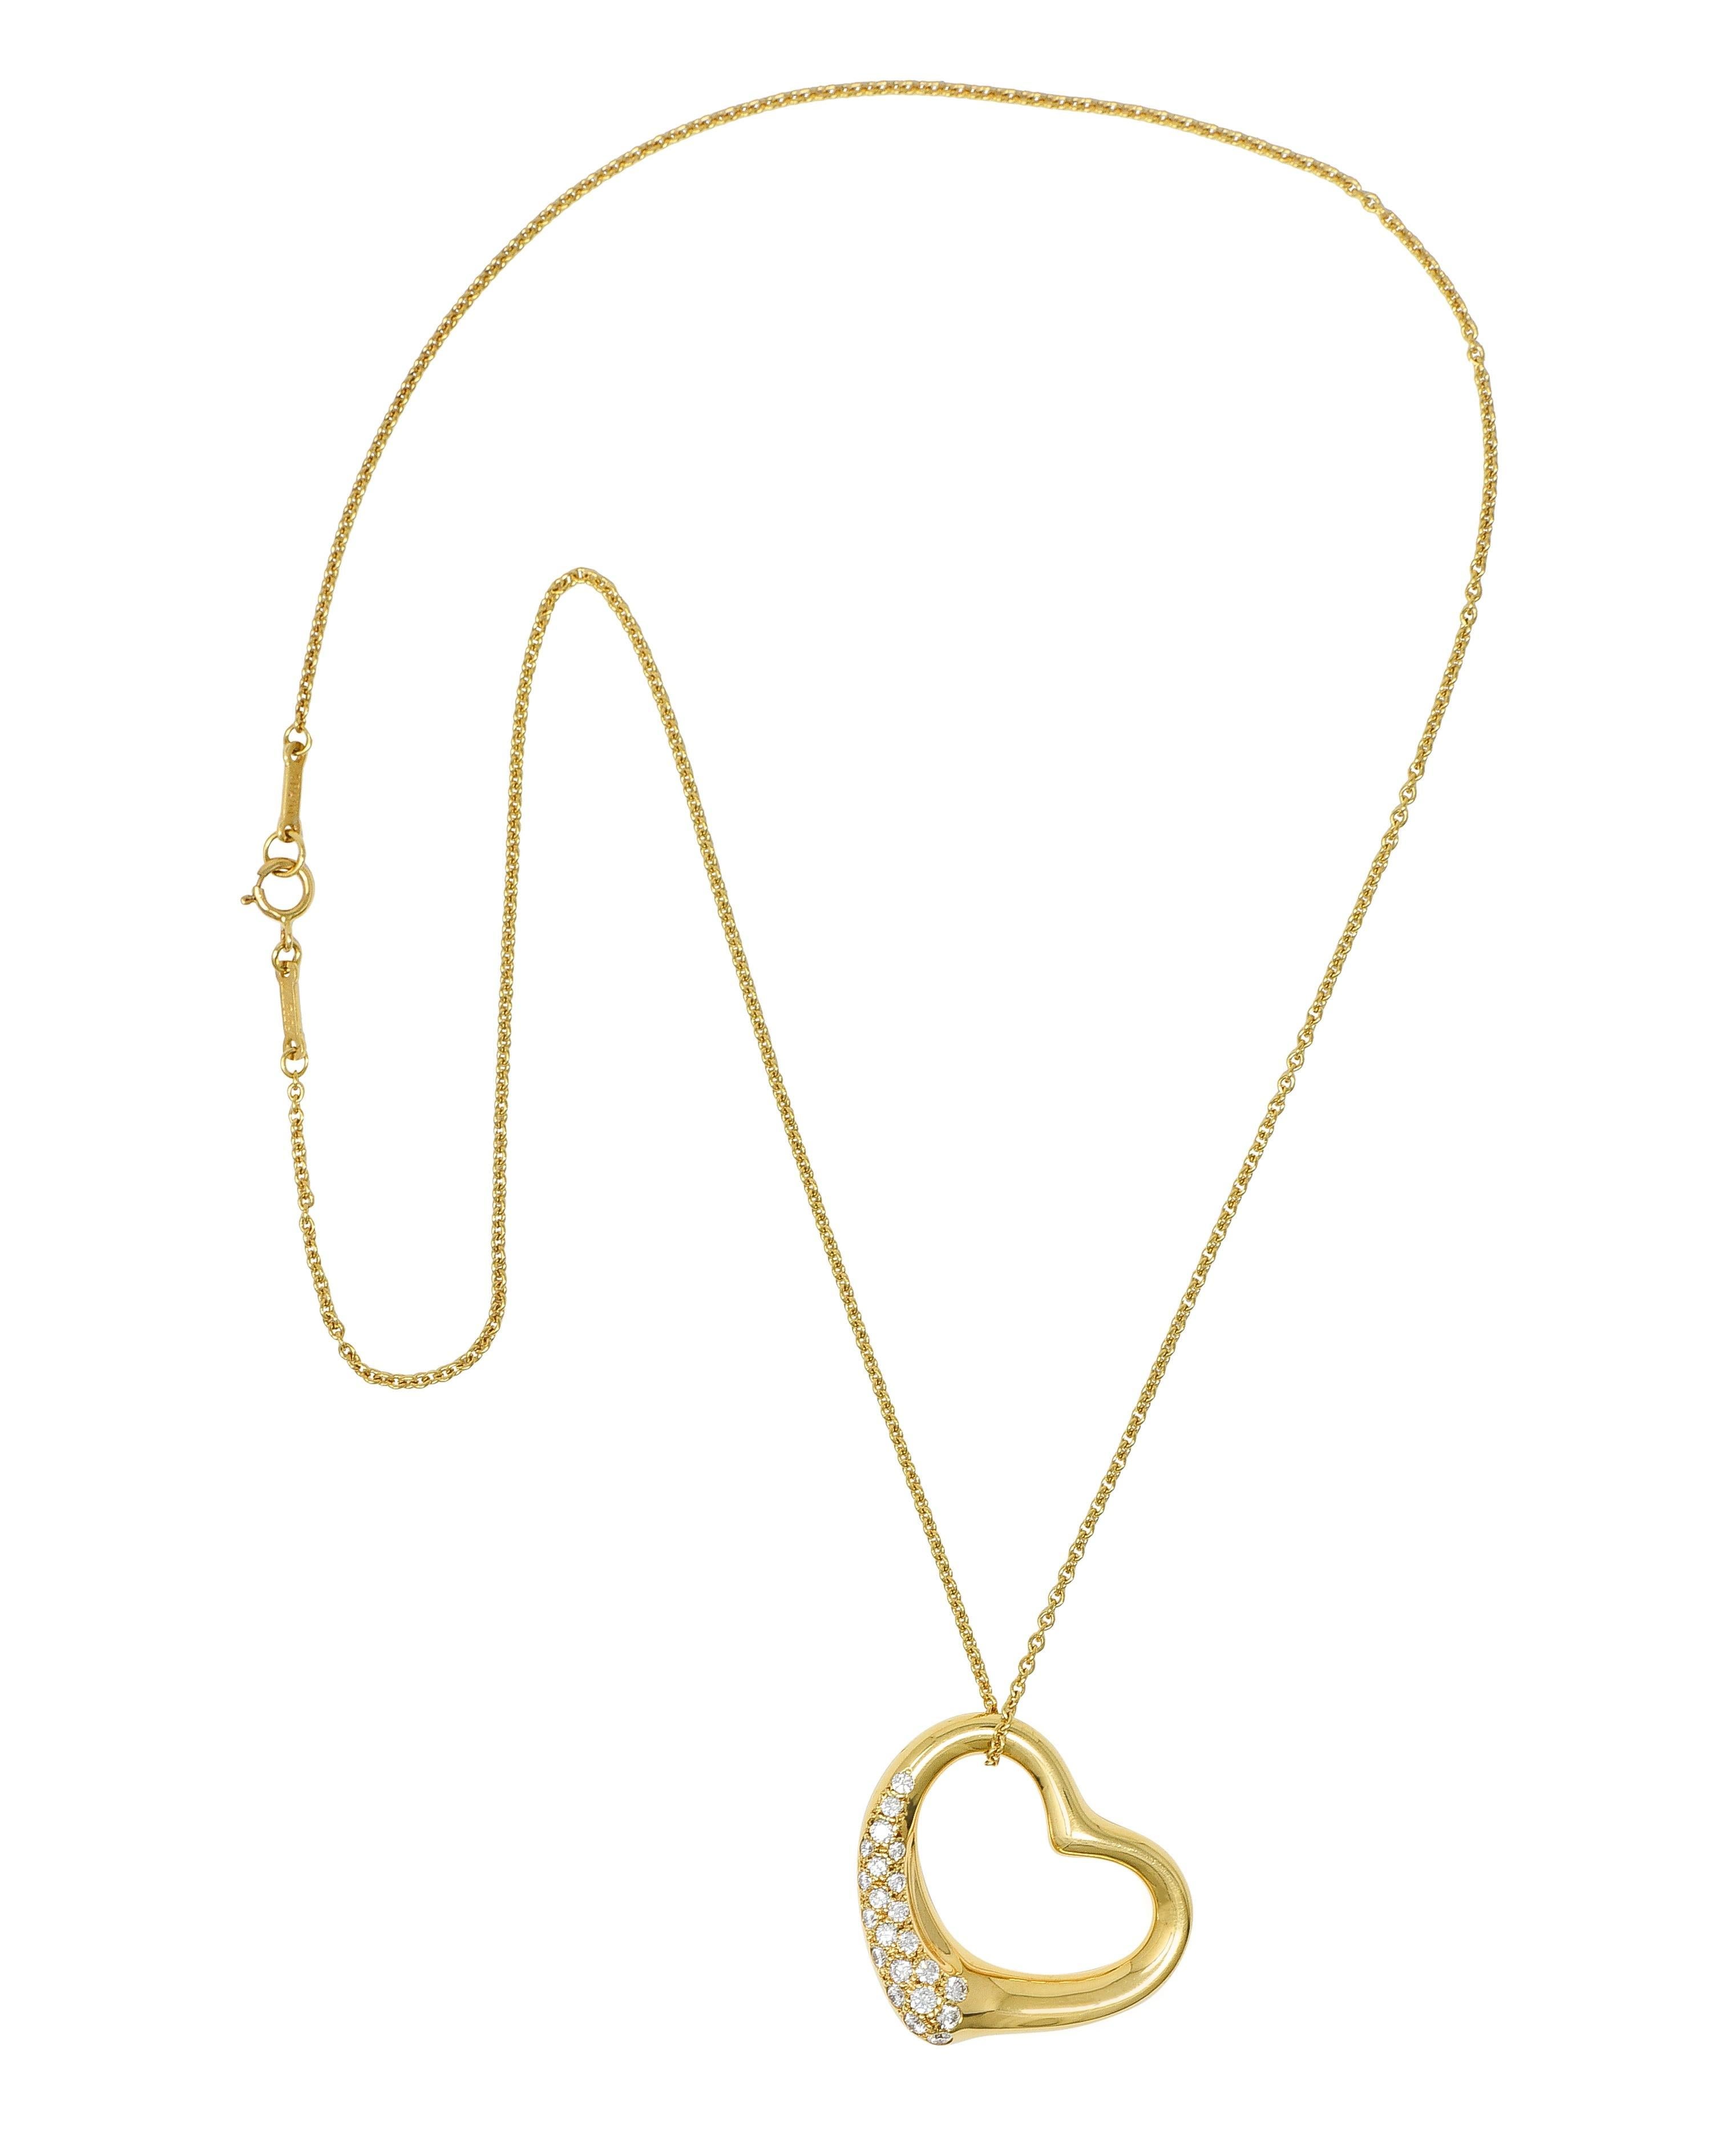 Comprised of a 1.5 mm cable link chain suspending a heart-shaped pendant
With a sinuous organic design and pavé set with round brilliant cut diamonds 
Weighing approximately 0.55 carat total - G color with VS1 clarity
Completed by spring clasp